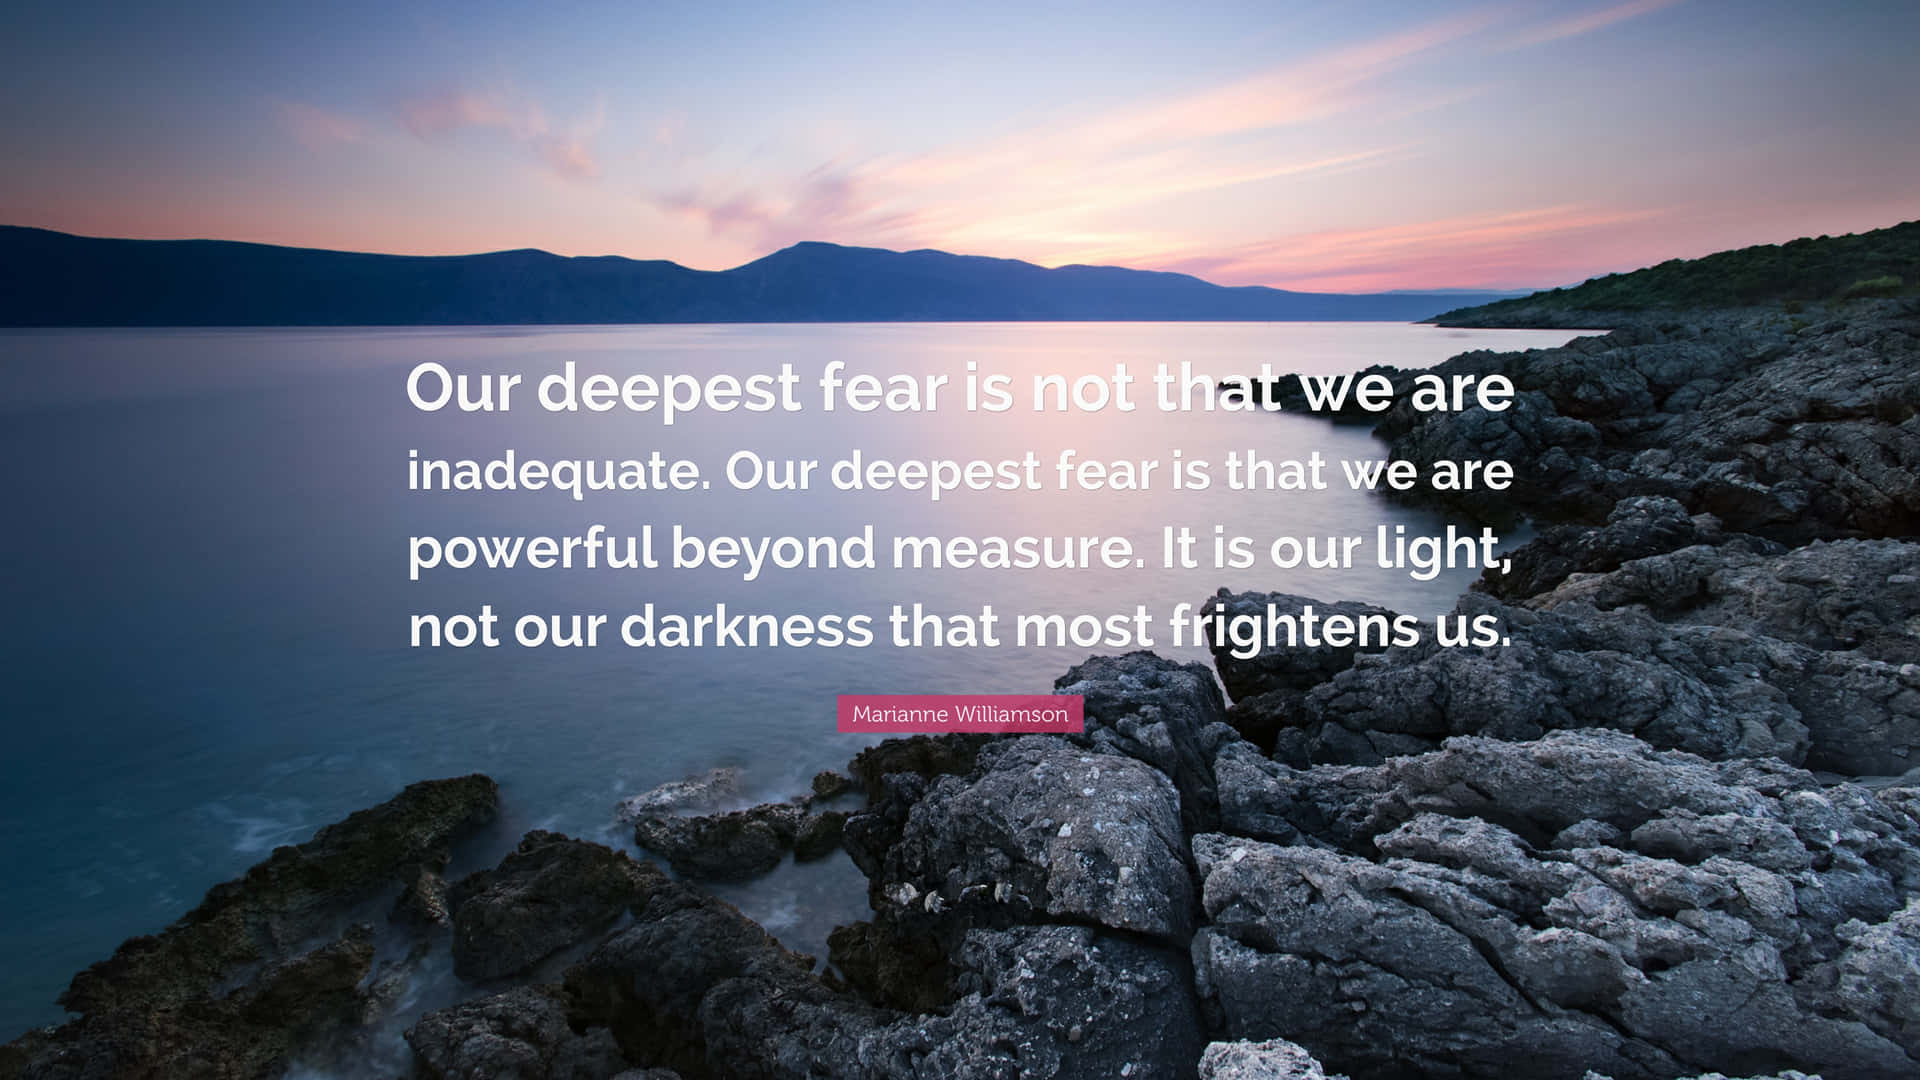 Quotation About Inadequate Fear Wallpaper